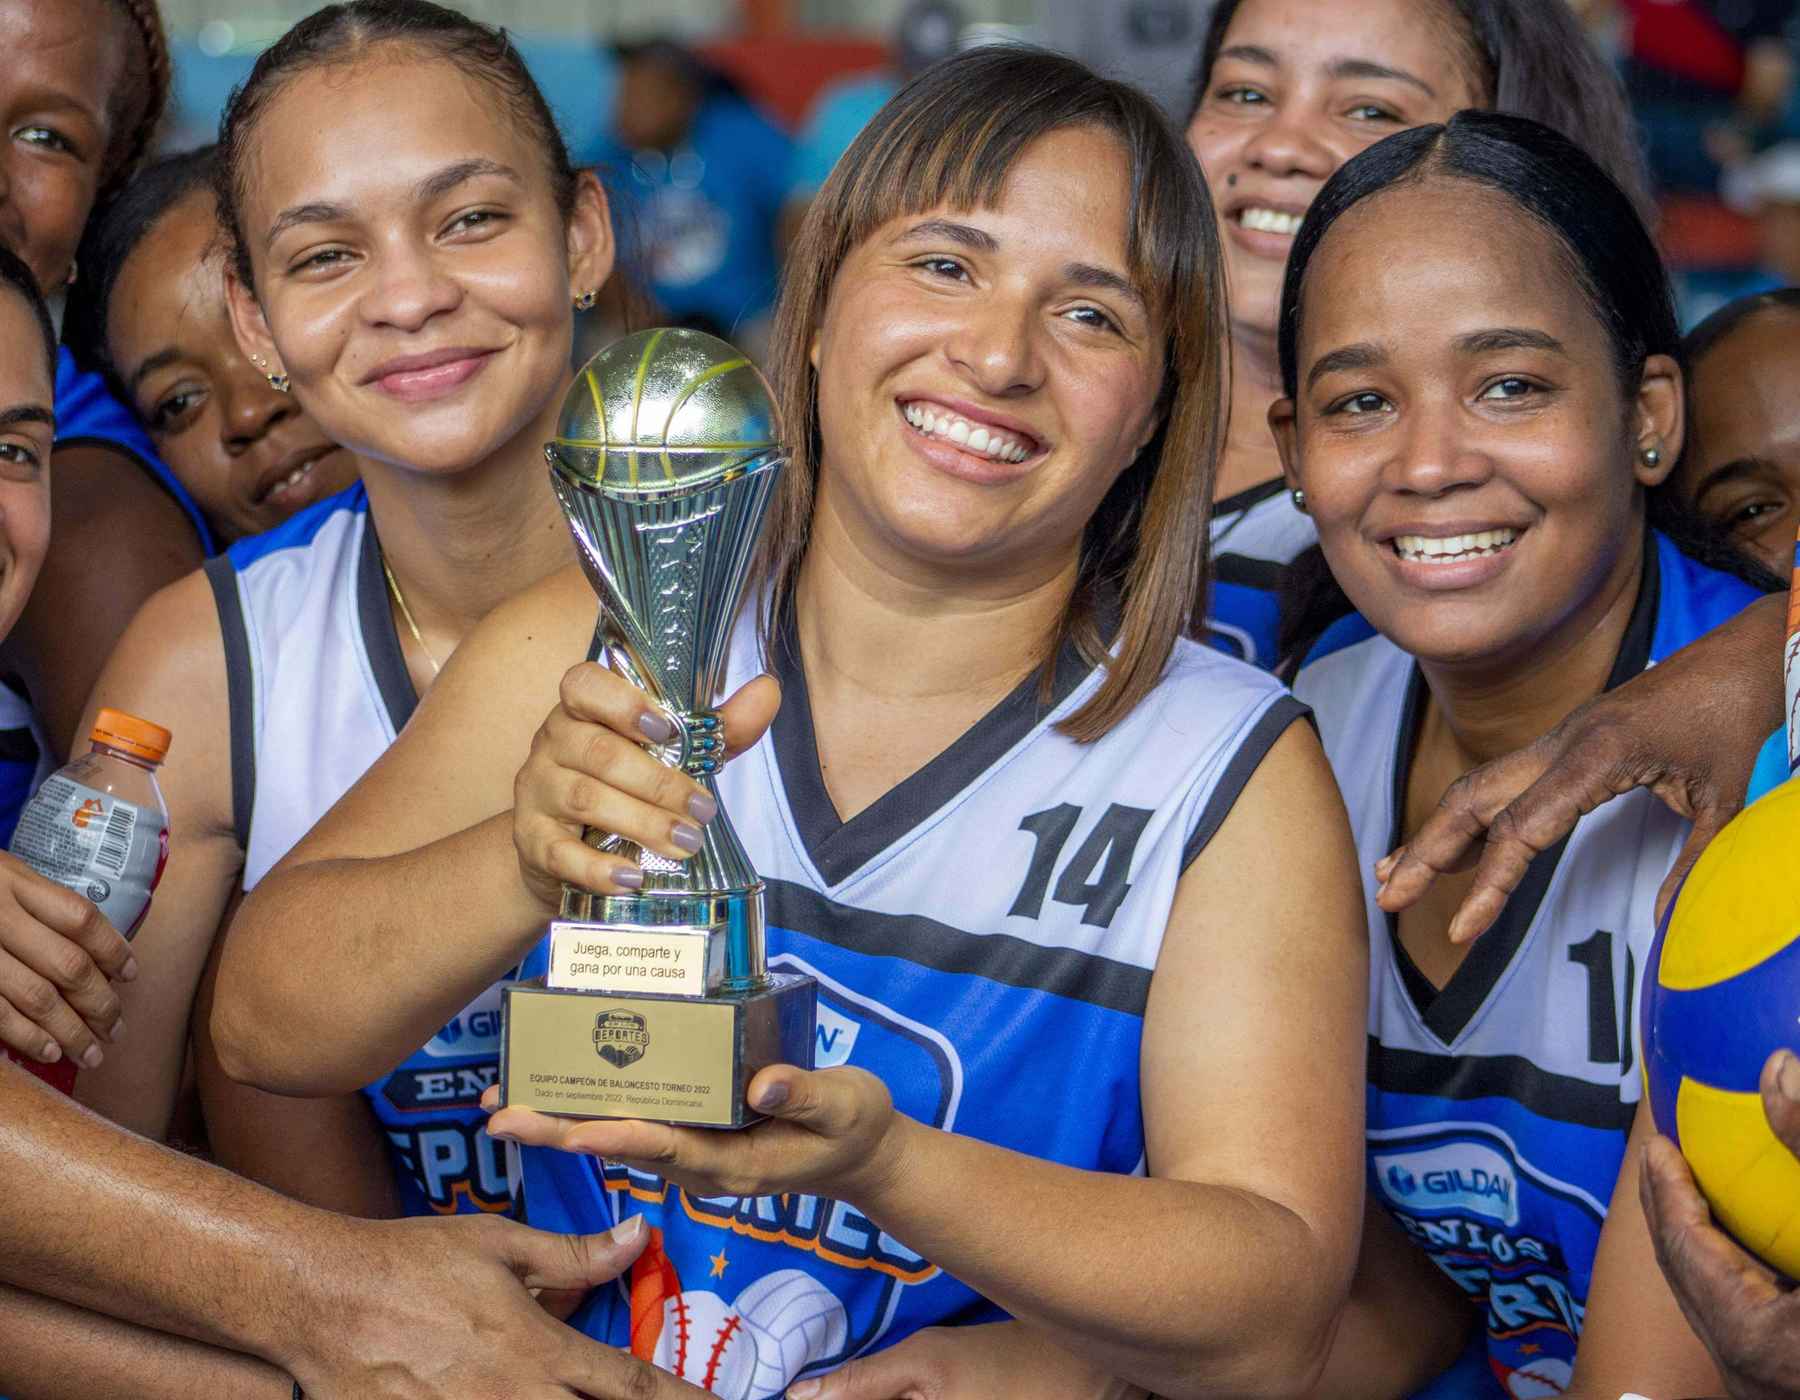 Gildan employees and holding a basketball trophy while wearing their blue and white jerseys.